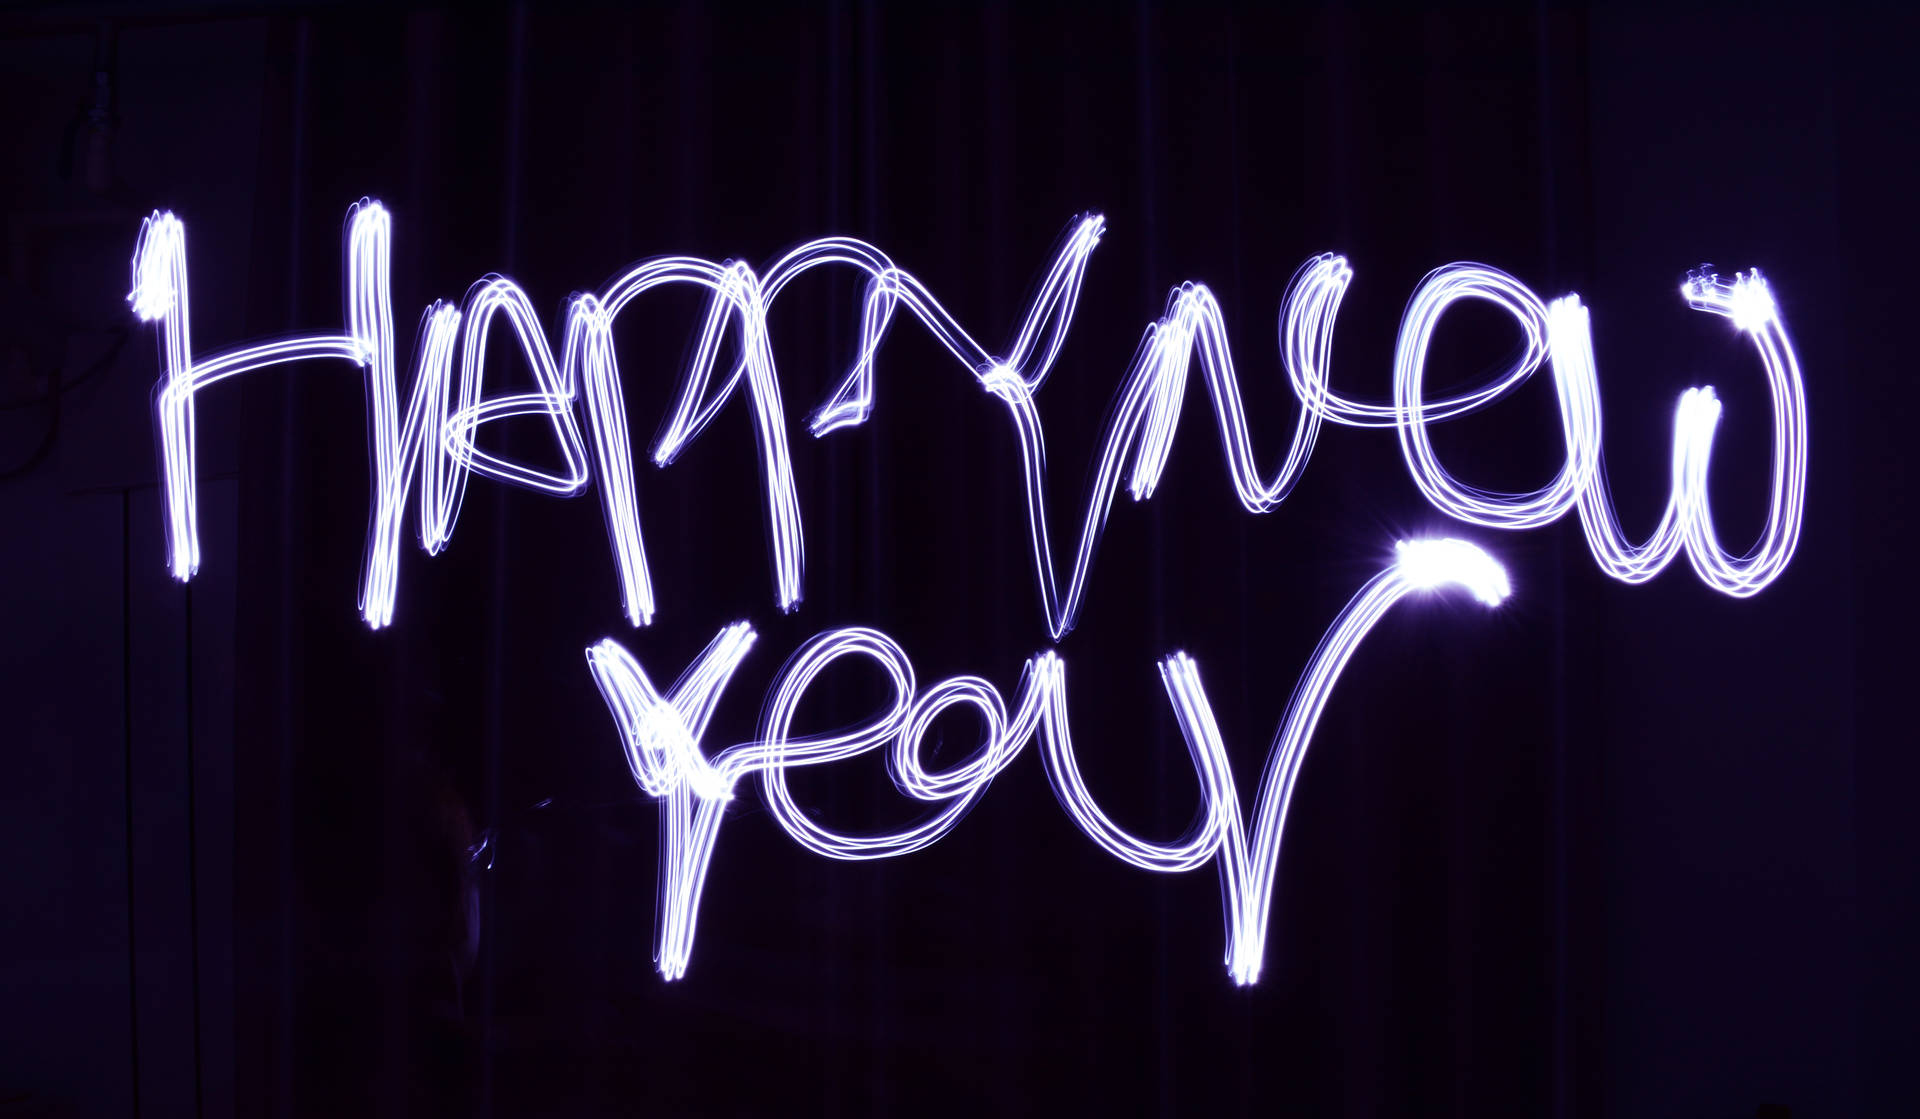 New Years 5641X3288 Wallpaper and Background Image